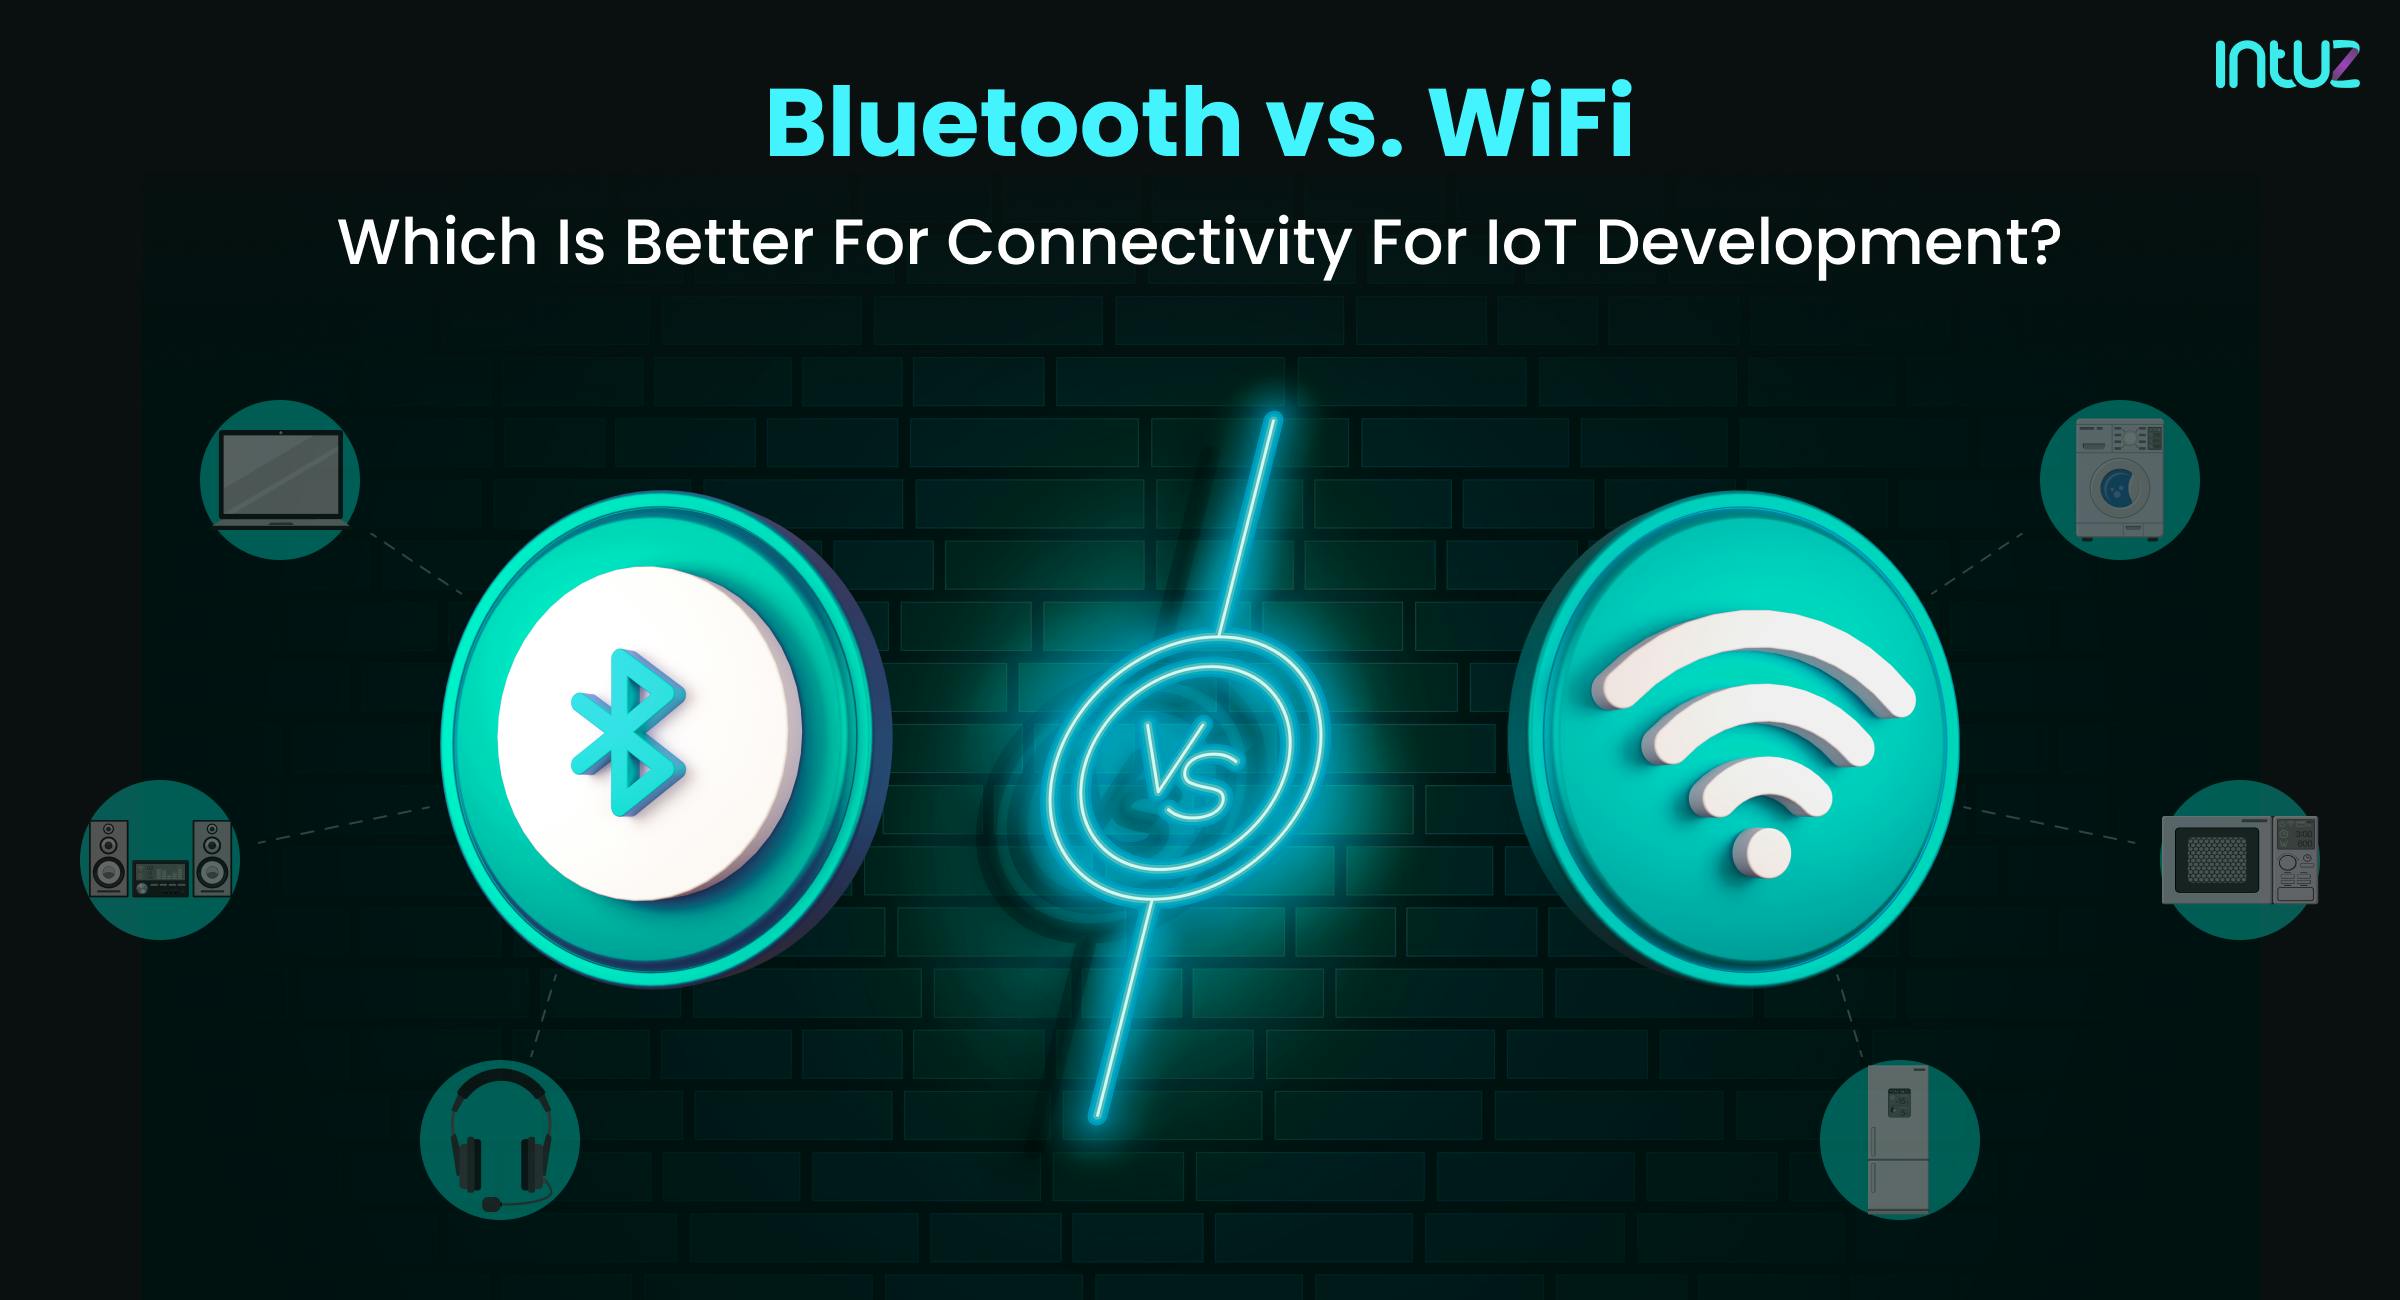 Bluetooth vs. WiFi: Which is a Better Connectivity for IoT